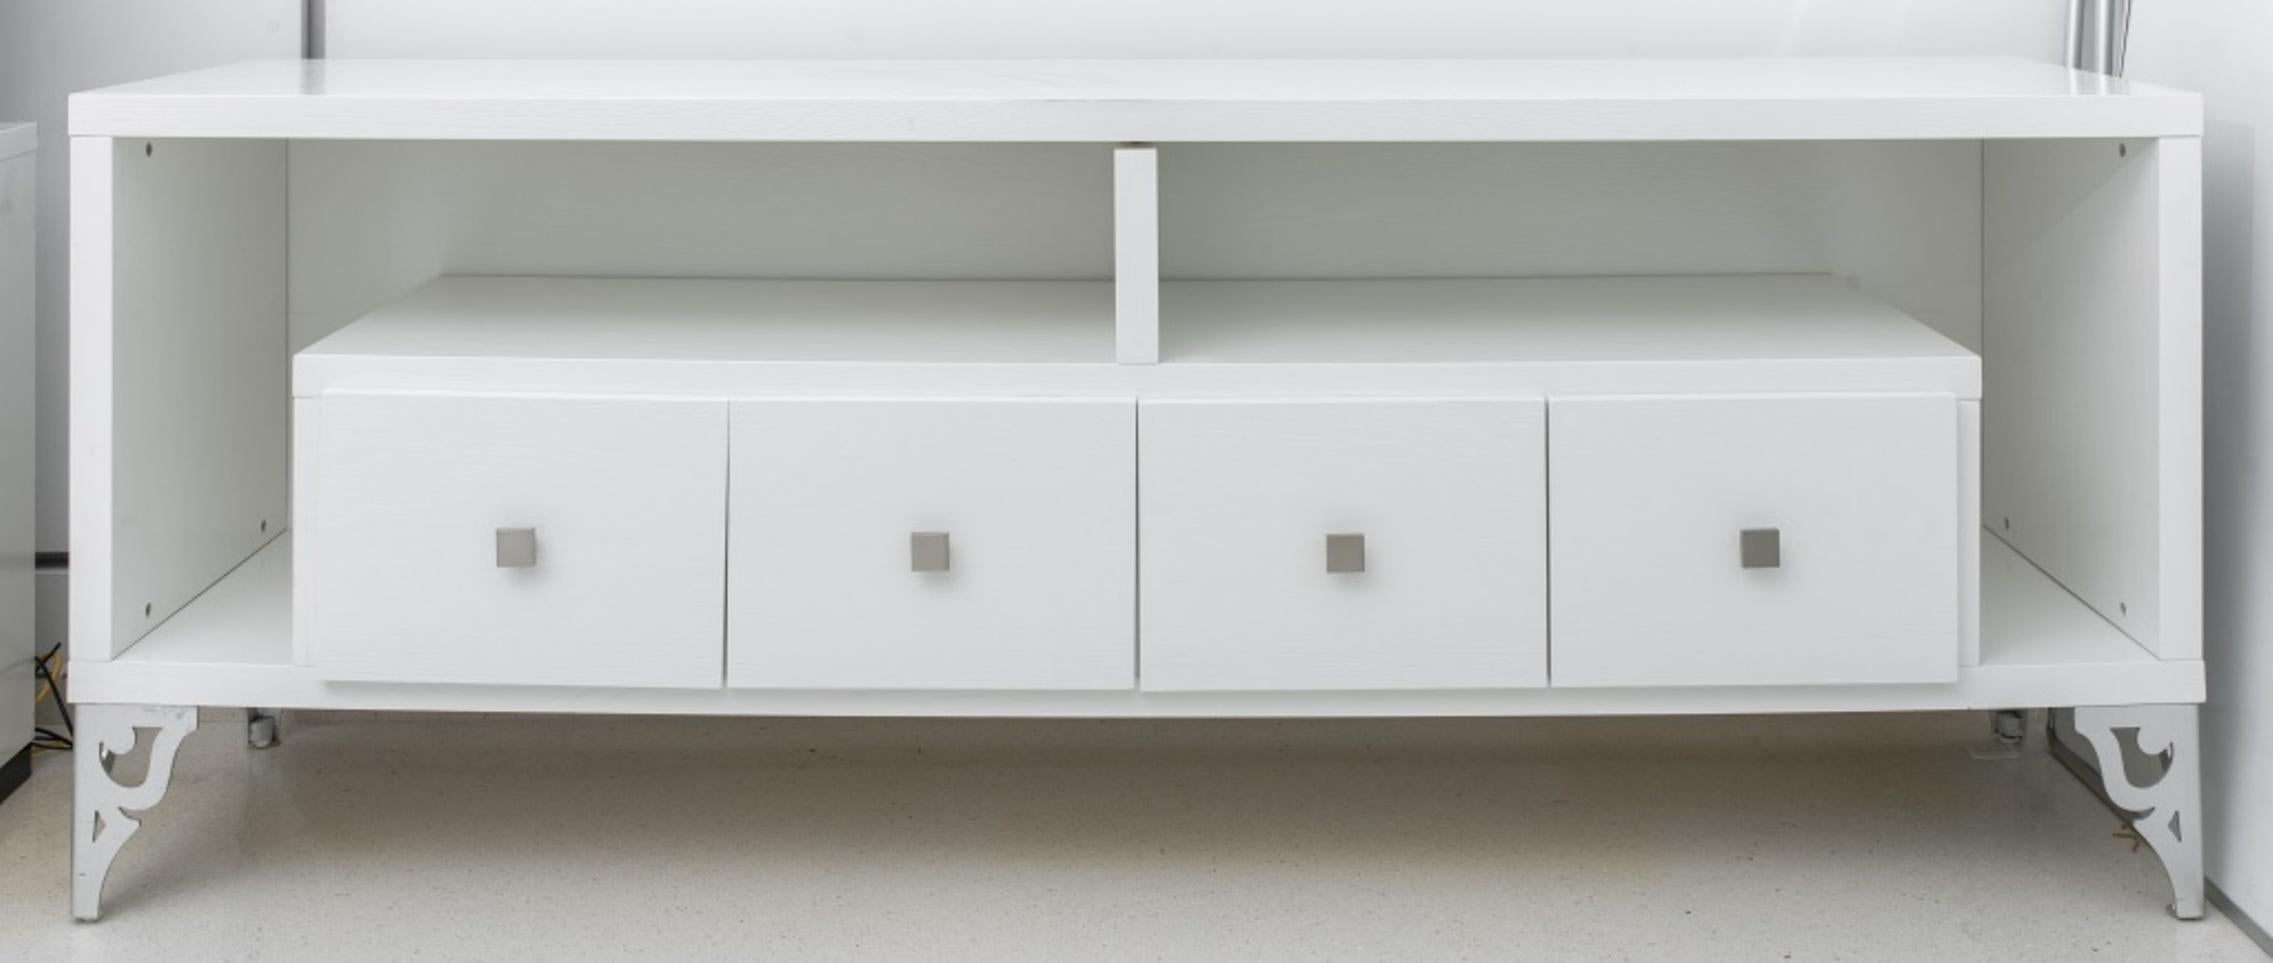 Hollywood Regency white lacquered side cabinet or credenza with four square drawers, each centering a square nickel pull, with two surrounding niches for storage, the whole on reticulated silvered cut-metal legs.
Dealer: S138XX.